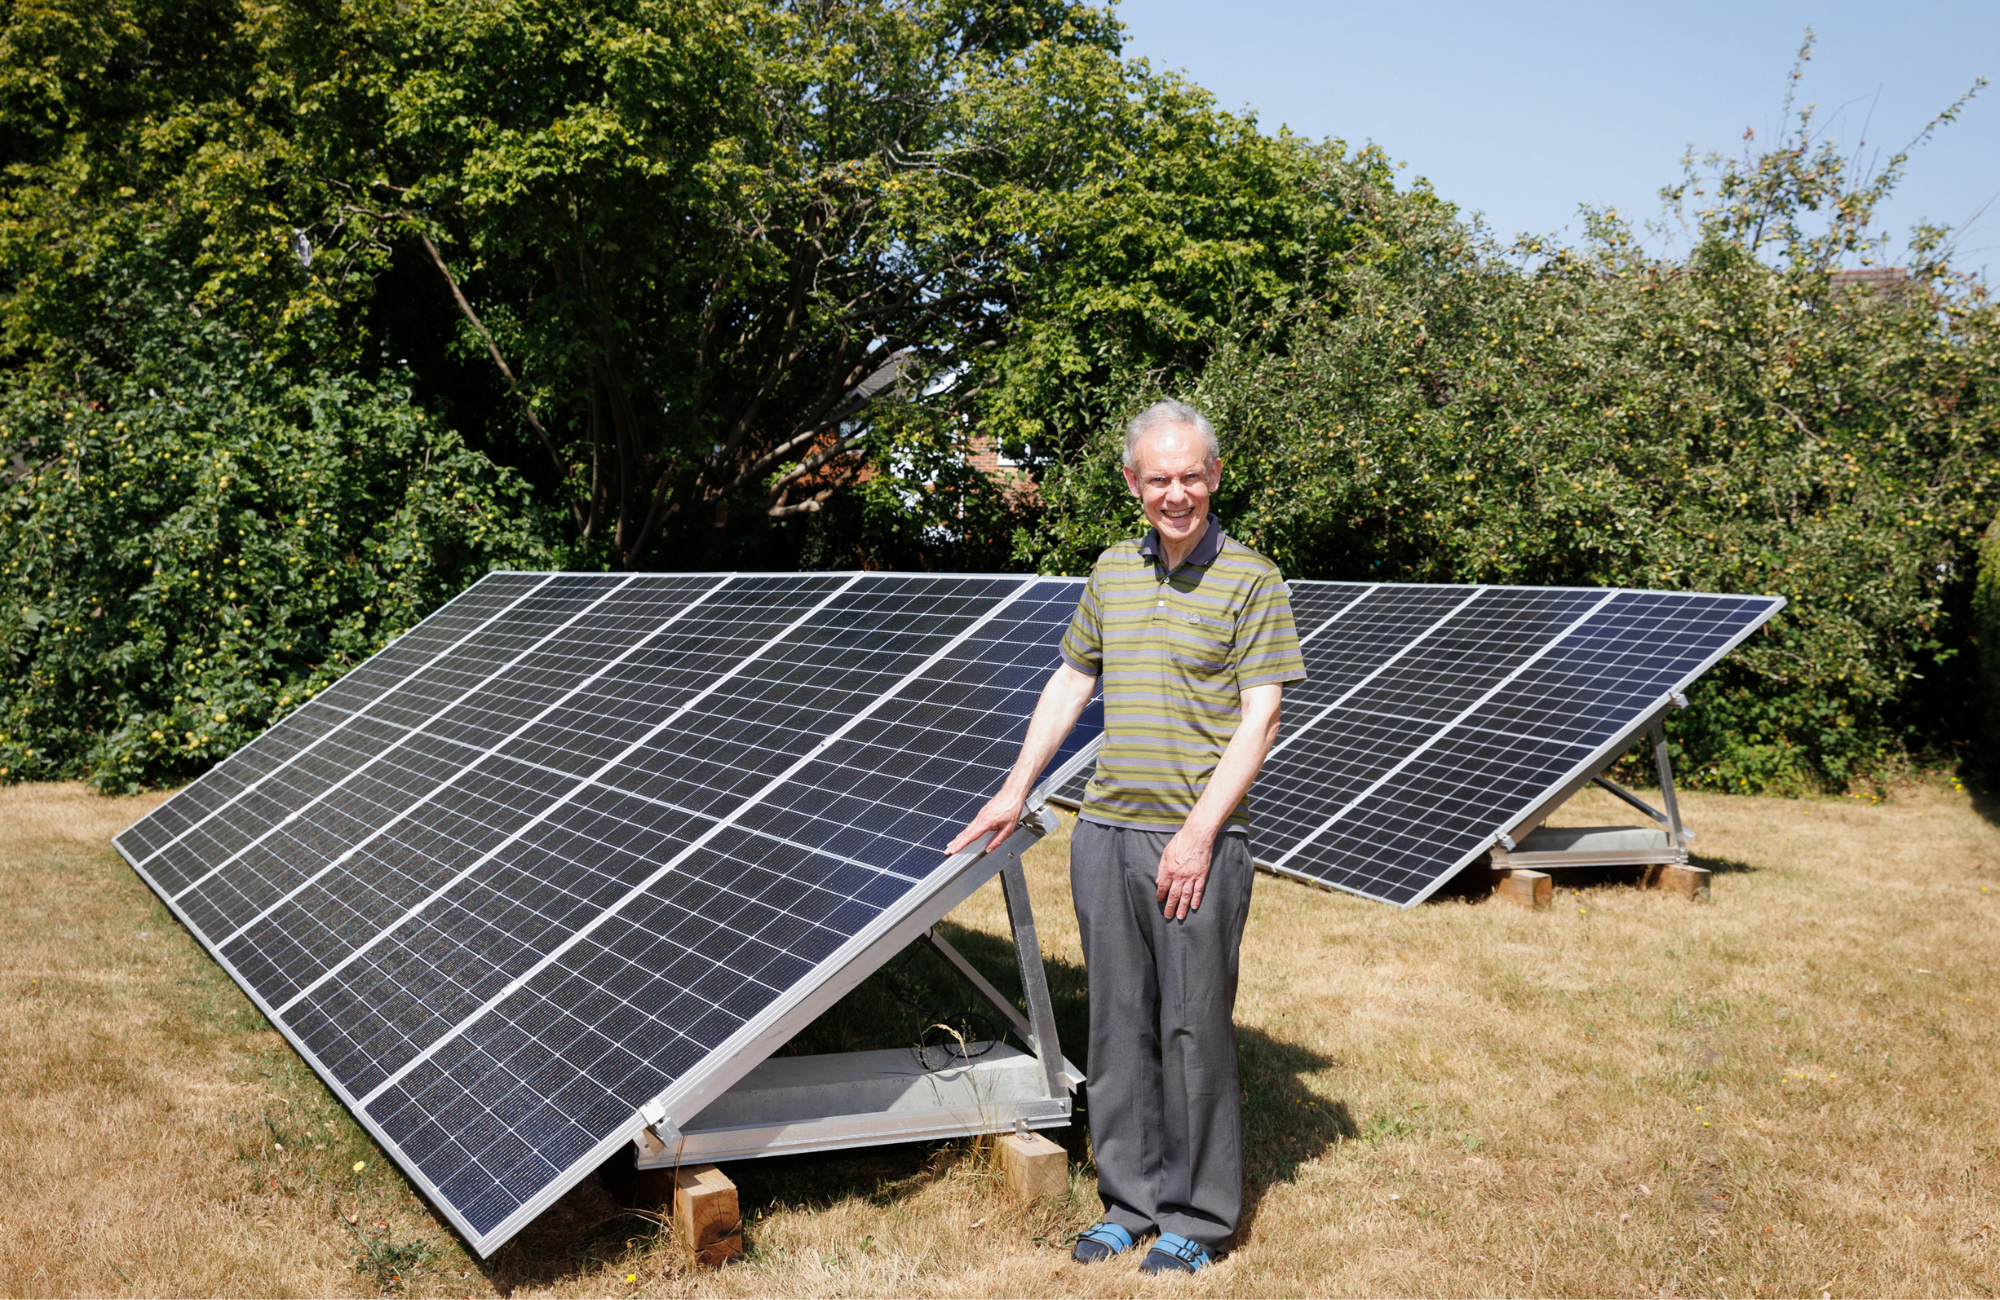 Peter stood outside next to an array of solar panels.